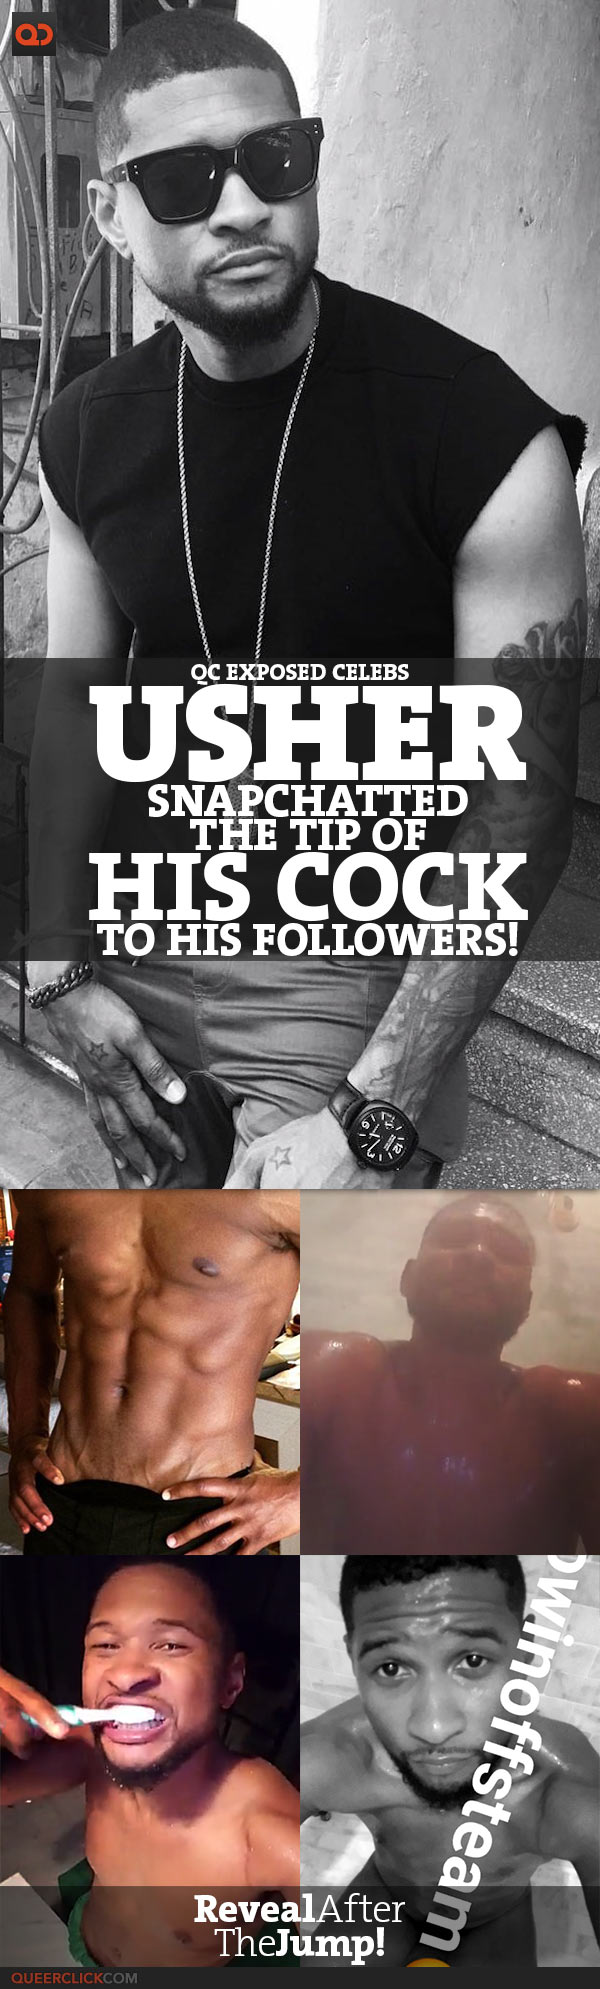 qc-usher_snapchatted_the_tip_of_his_cock_to_his_followers-teaser